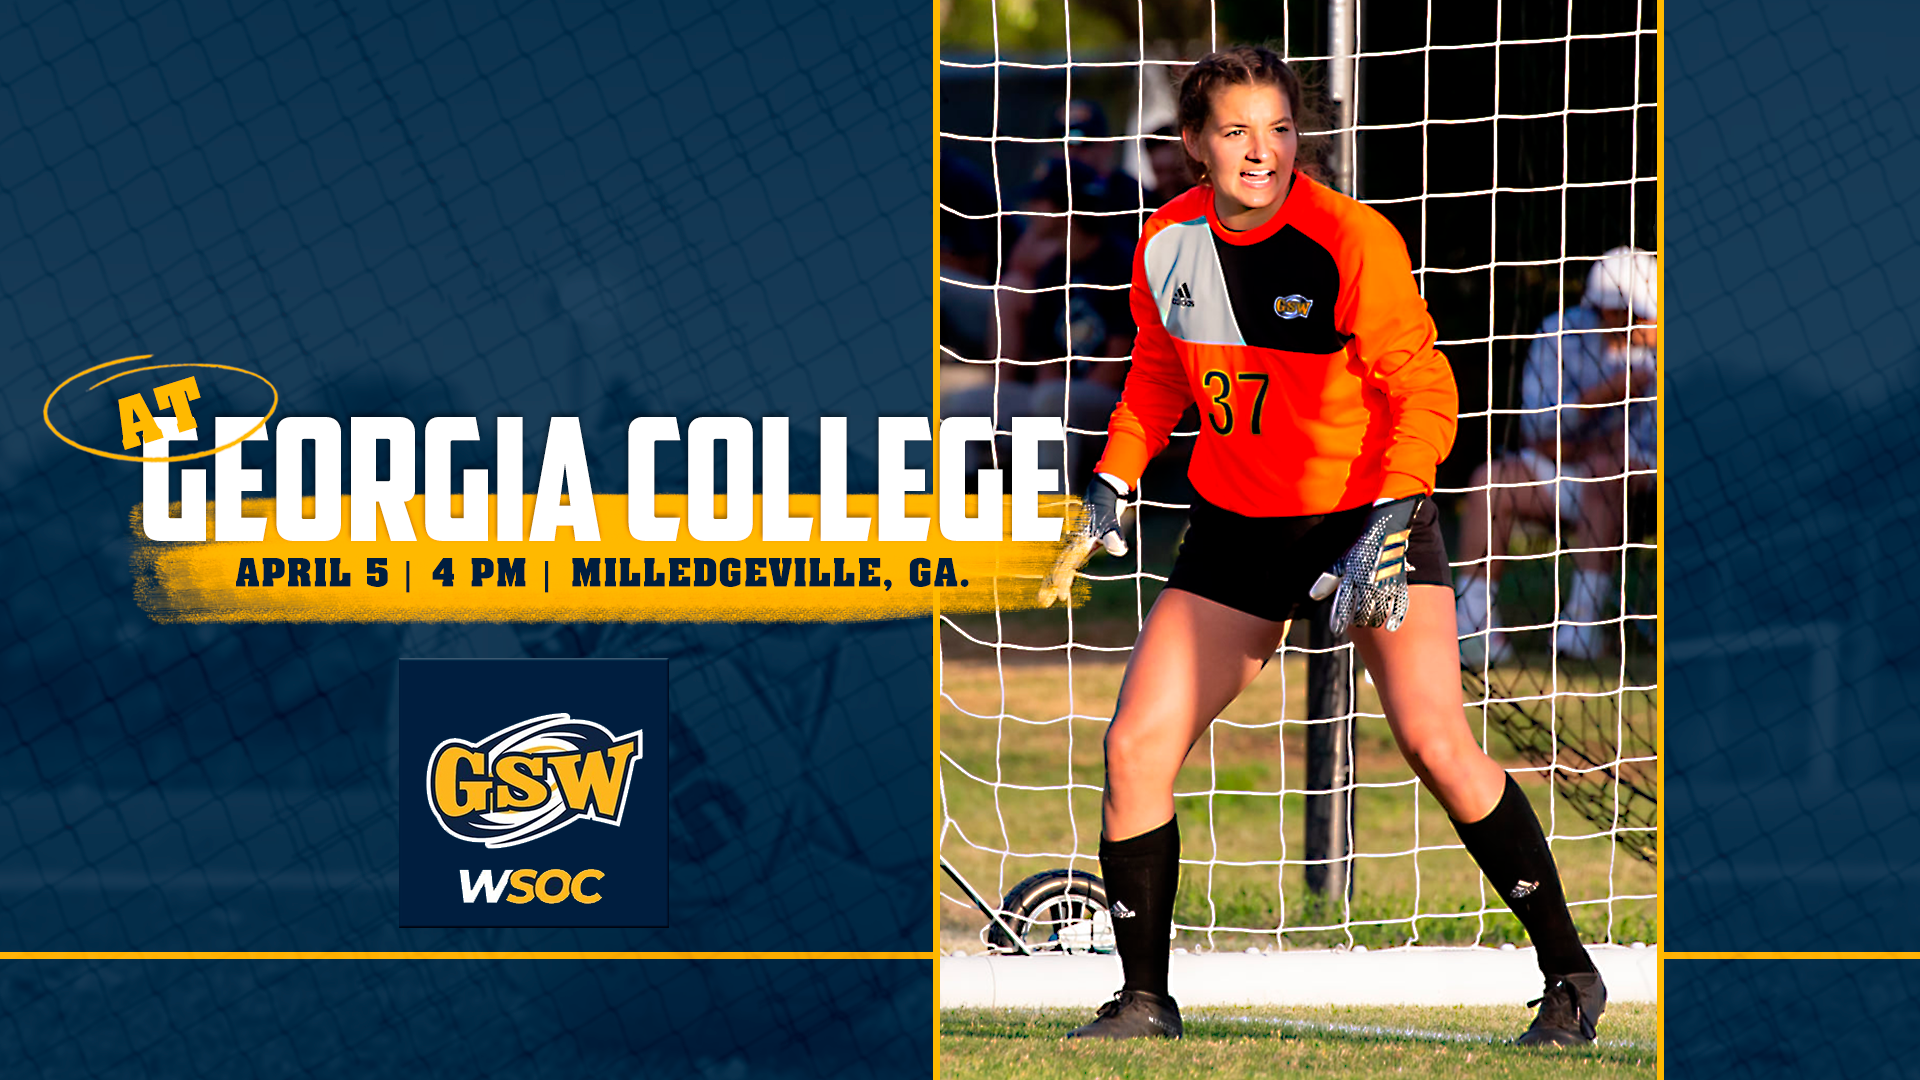 On The Road: Women's Soccer at Georgia College